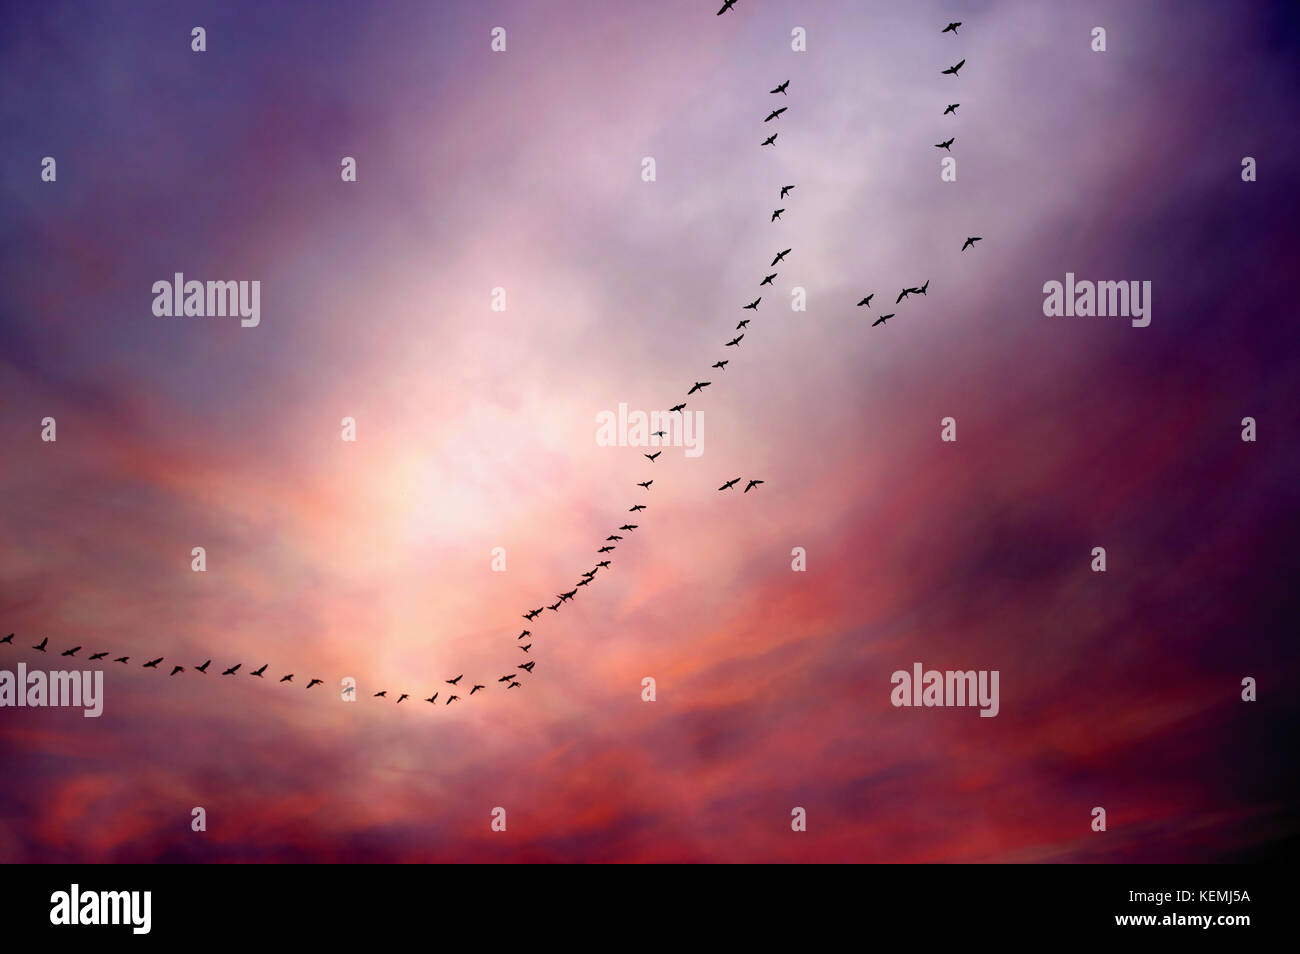 Autumn birds migration in V-formation on deep dramatic sky. Silhouettes of flying geese flock. Stock Photo